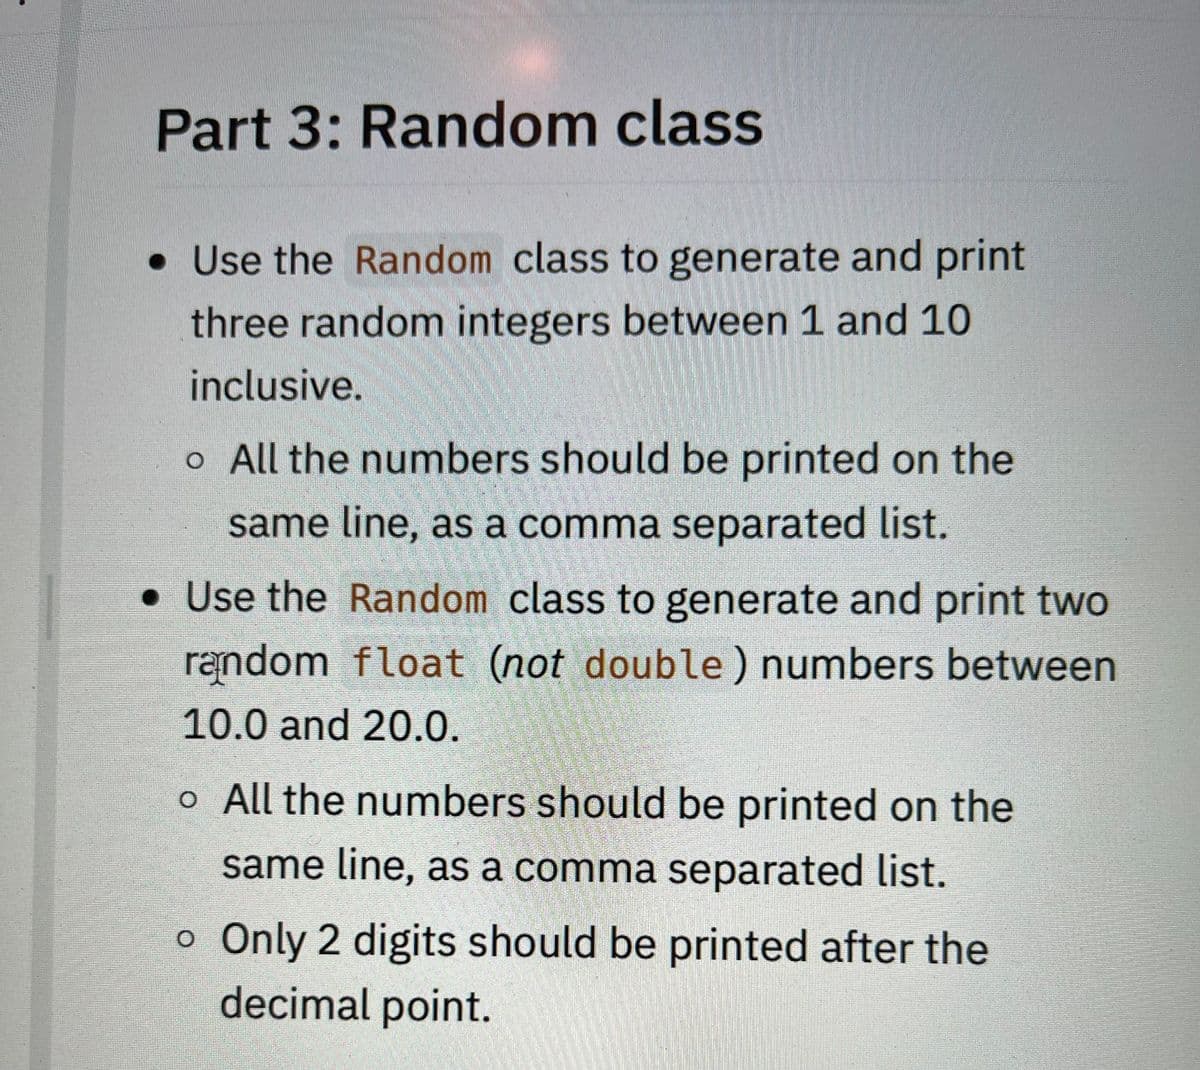 Part 3: Random class
• Use the Random class to generate and print
three random integers between 1 and 10
inclusive.
o All the numbers should be printed on the
same line, as a comma separated list.
. Use the Random class to generate and print two
random float (not double) numbers between
10.0 and 20.0.
o All the numbers should be printed on the
same line, as a comma separated list.
o Only 2 digits should be printed after the
decimal point.